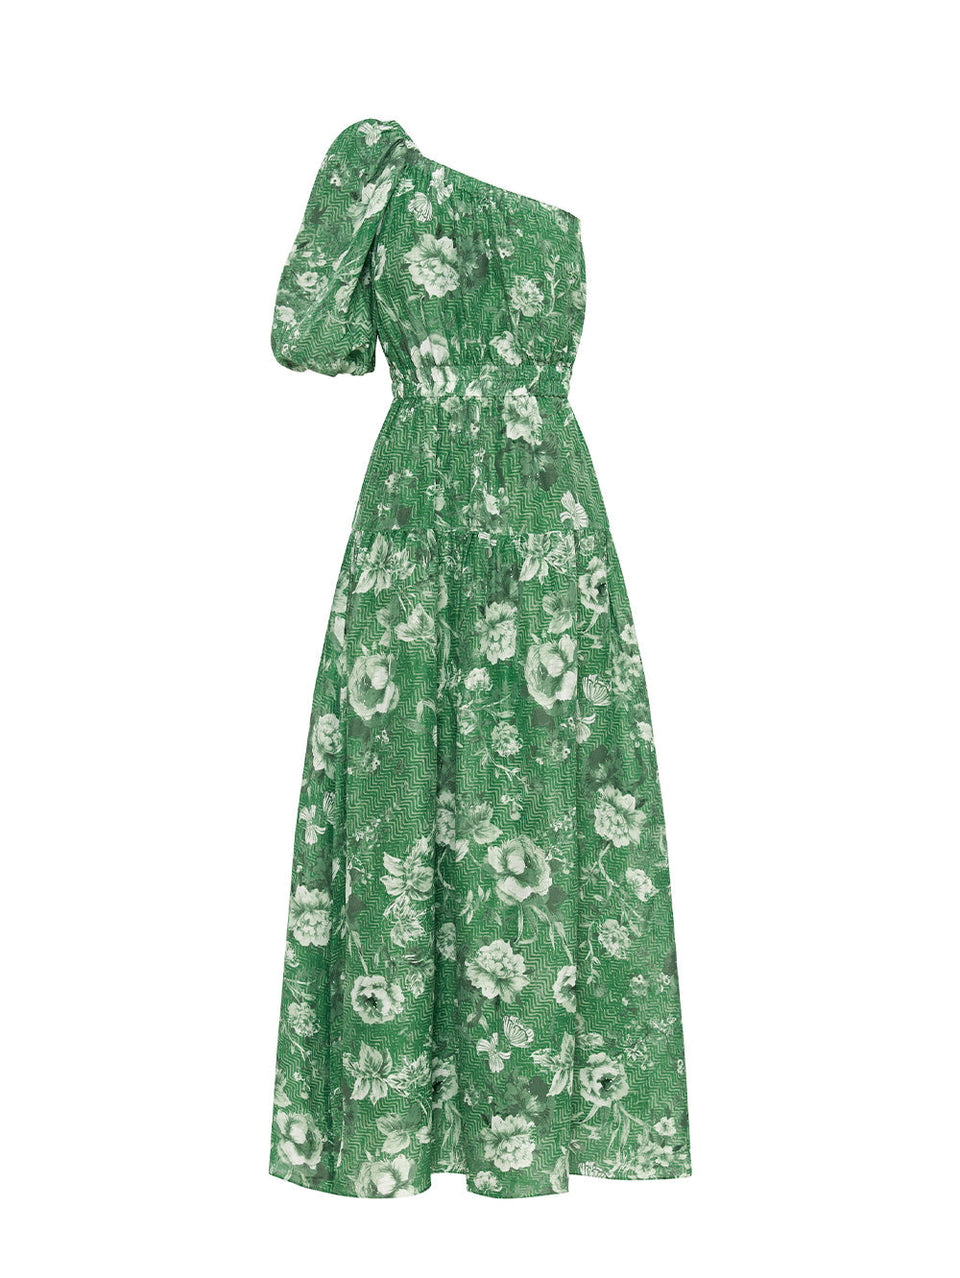 Ghost image of KIVARI Khalo Maxi Dress: A green floral one-shoulder dress with a short sleeve, elasticated front and waist, and tiered skirt.